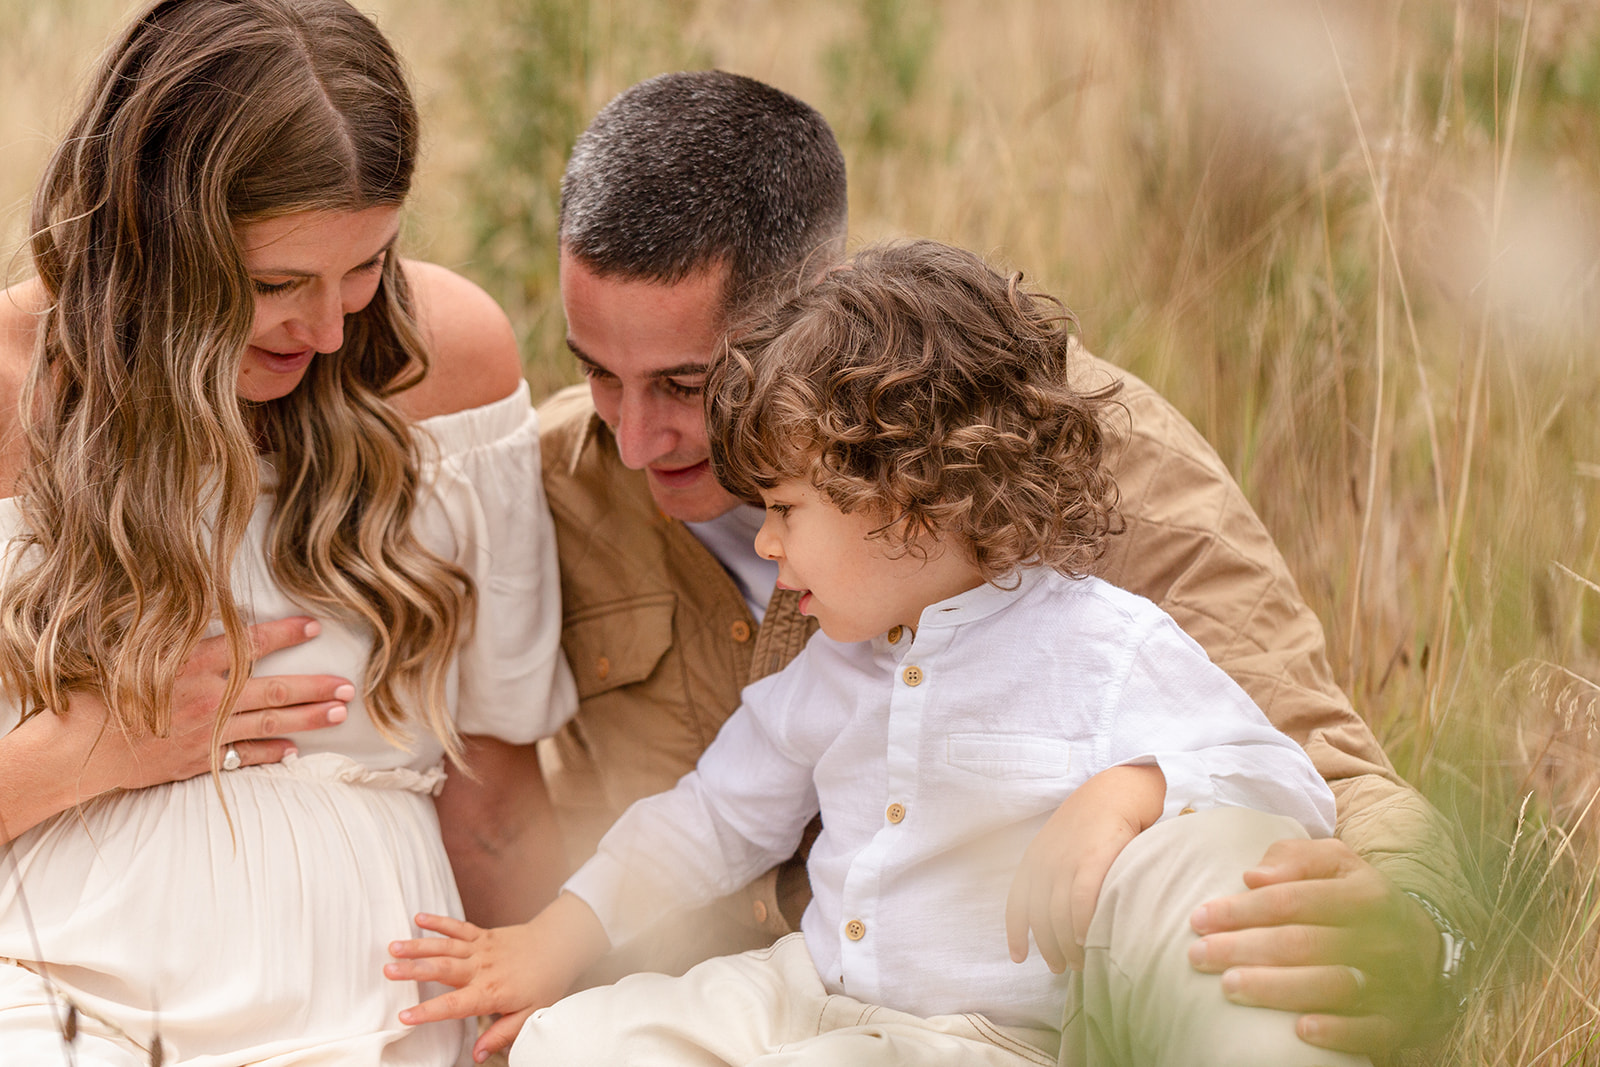 A pregnant mom sits in some tall grass with her husband and toddler son touching the bump